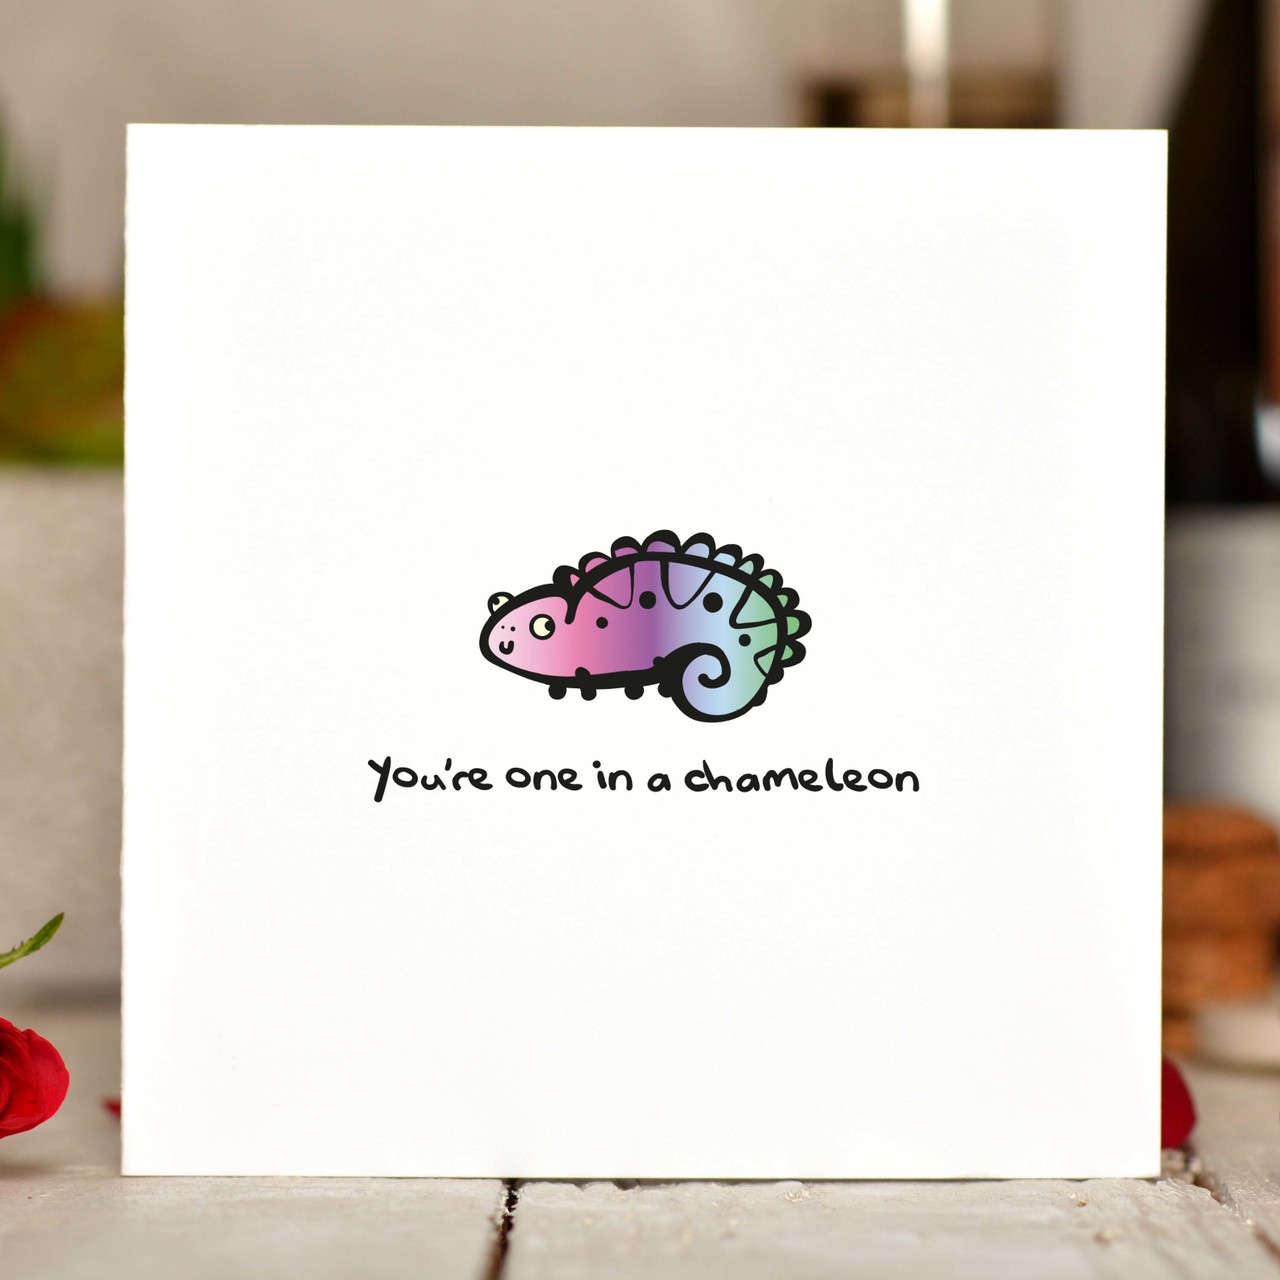 You’re one in a chameleon Card